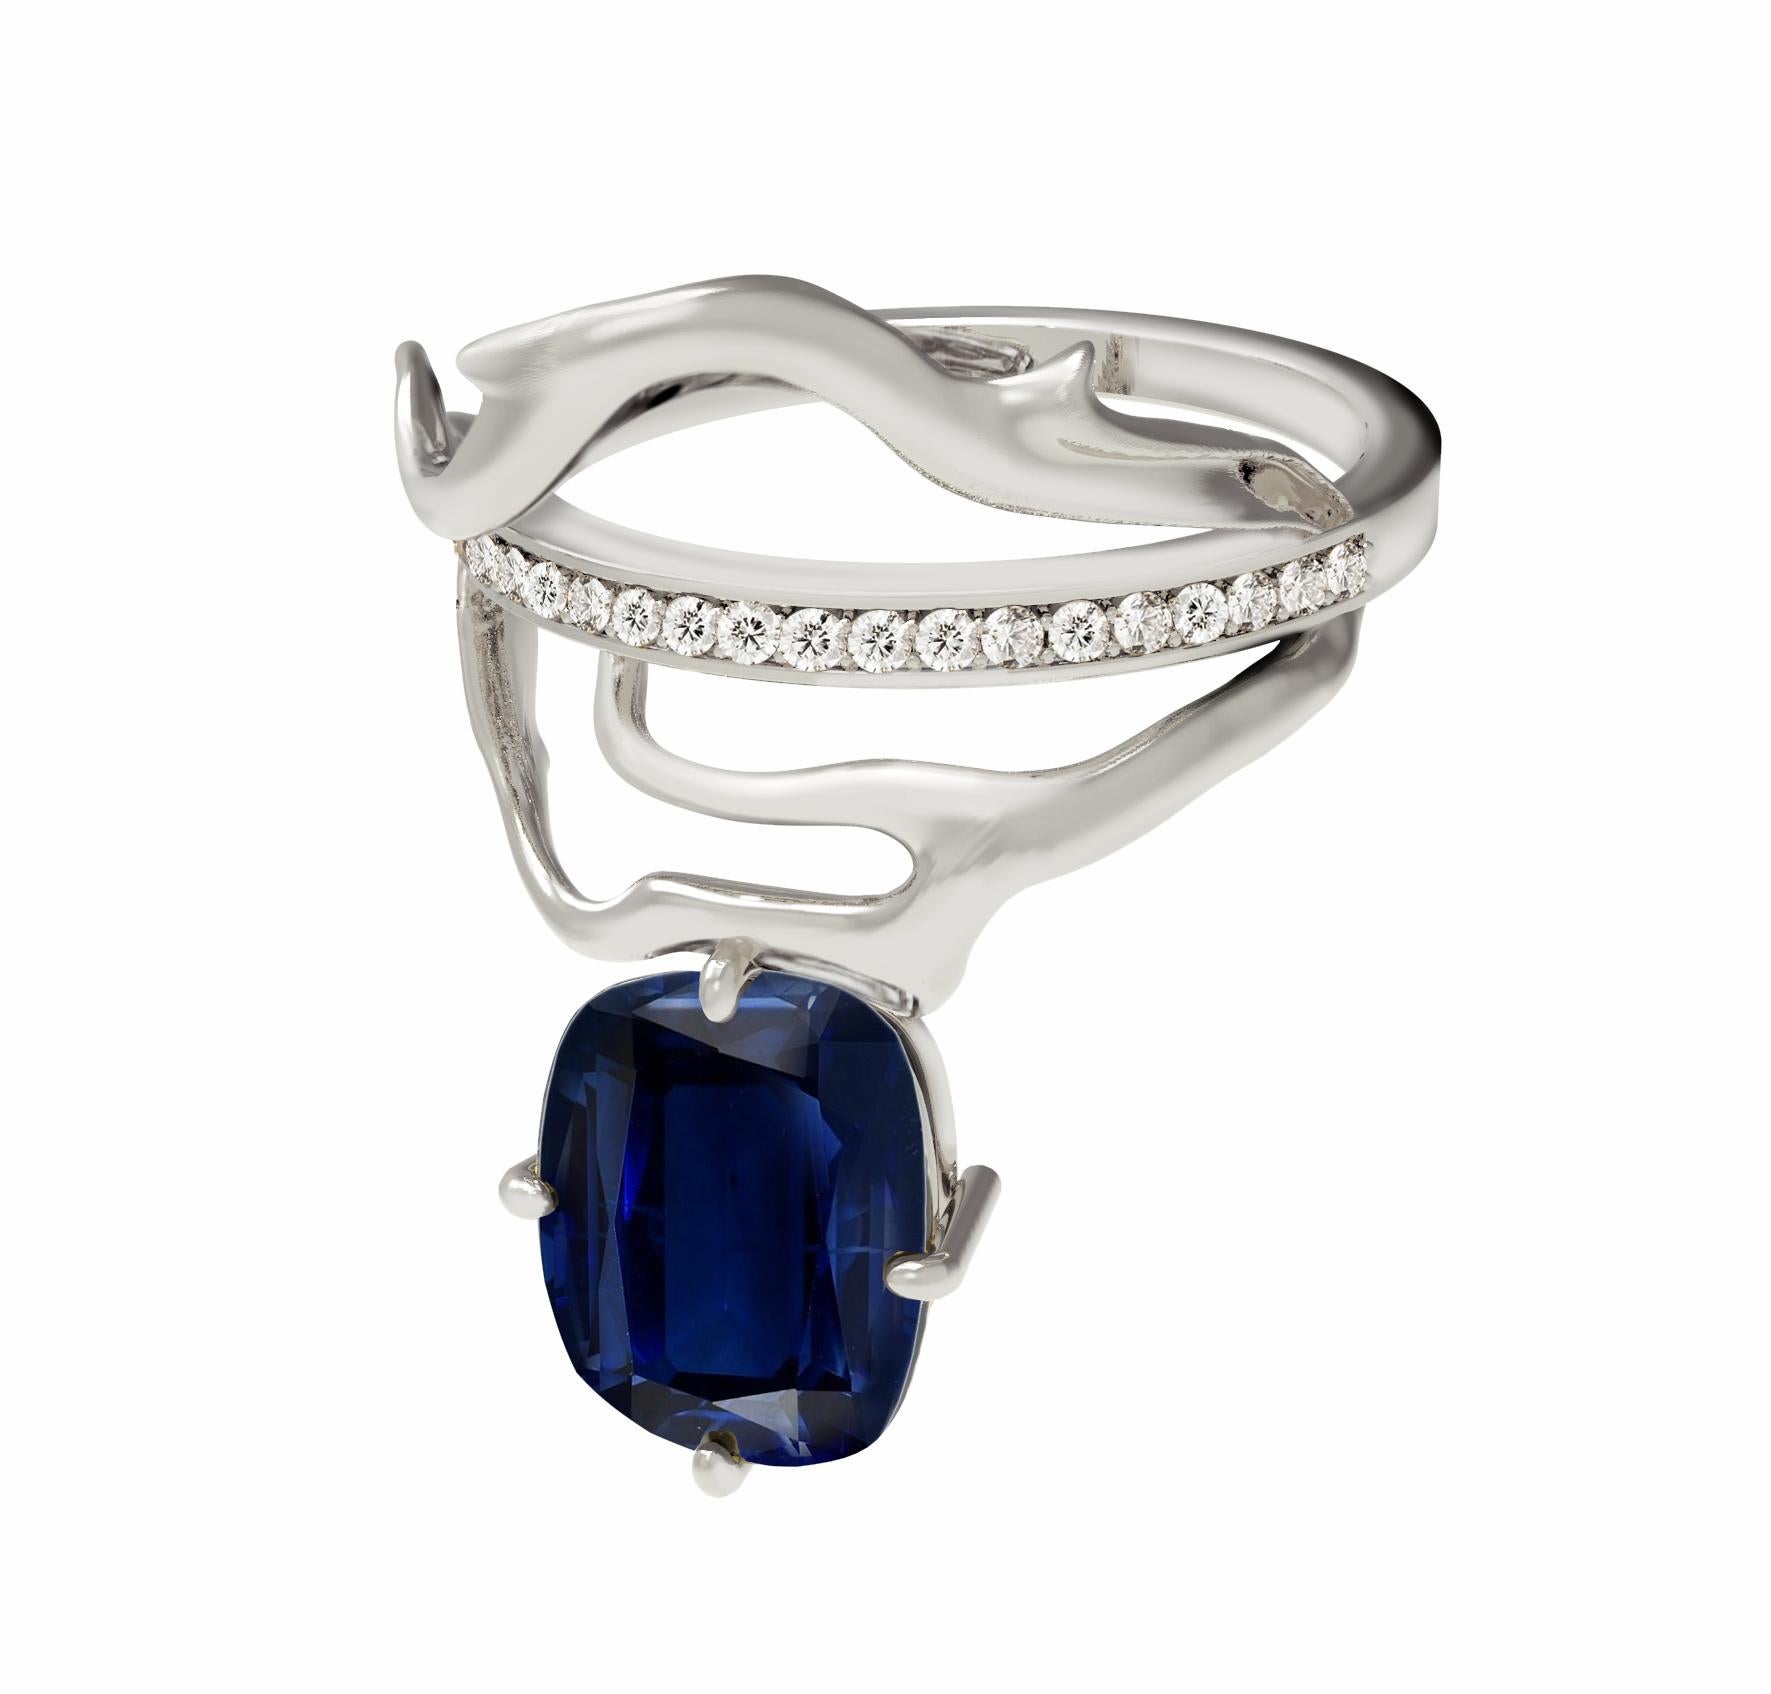 Antique Cushion Cut Eighteen Karat White Gold Cocktail Ring with Sapphire and Diamonds For Sale